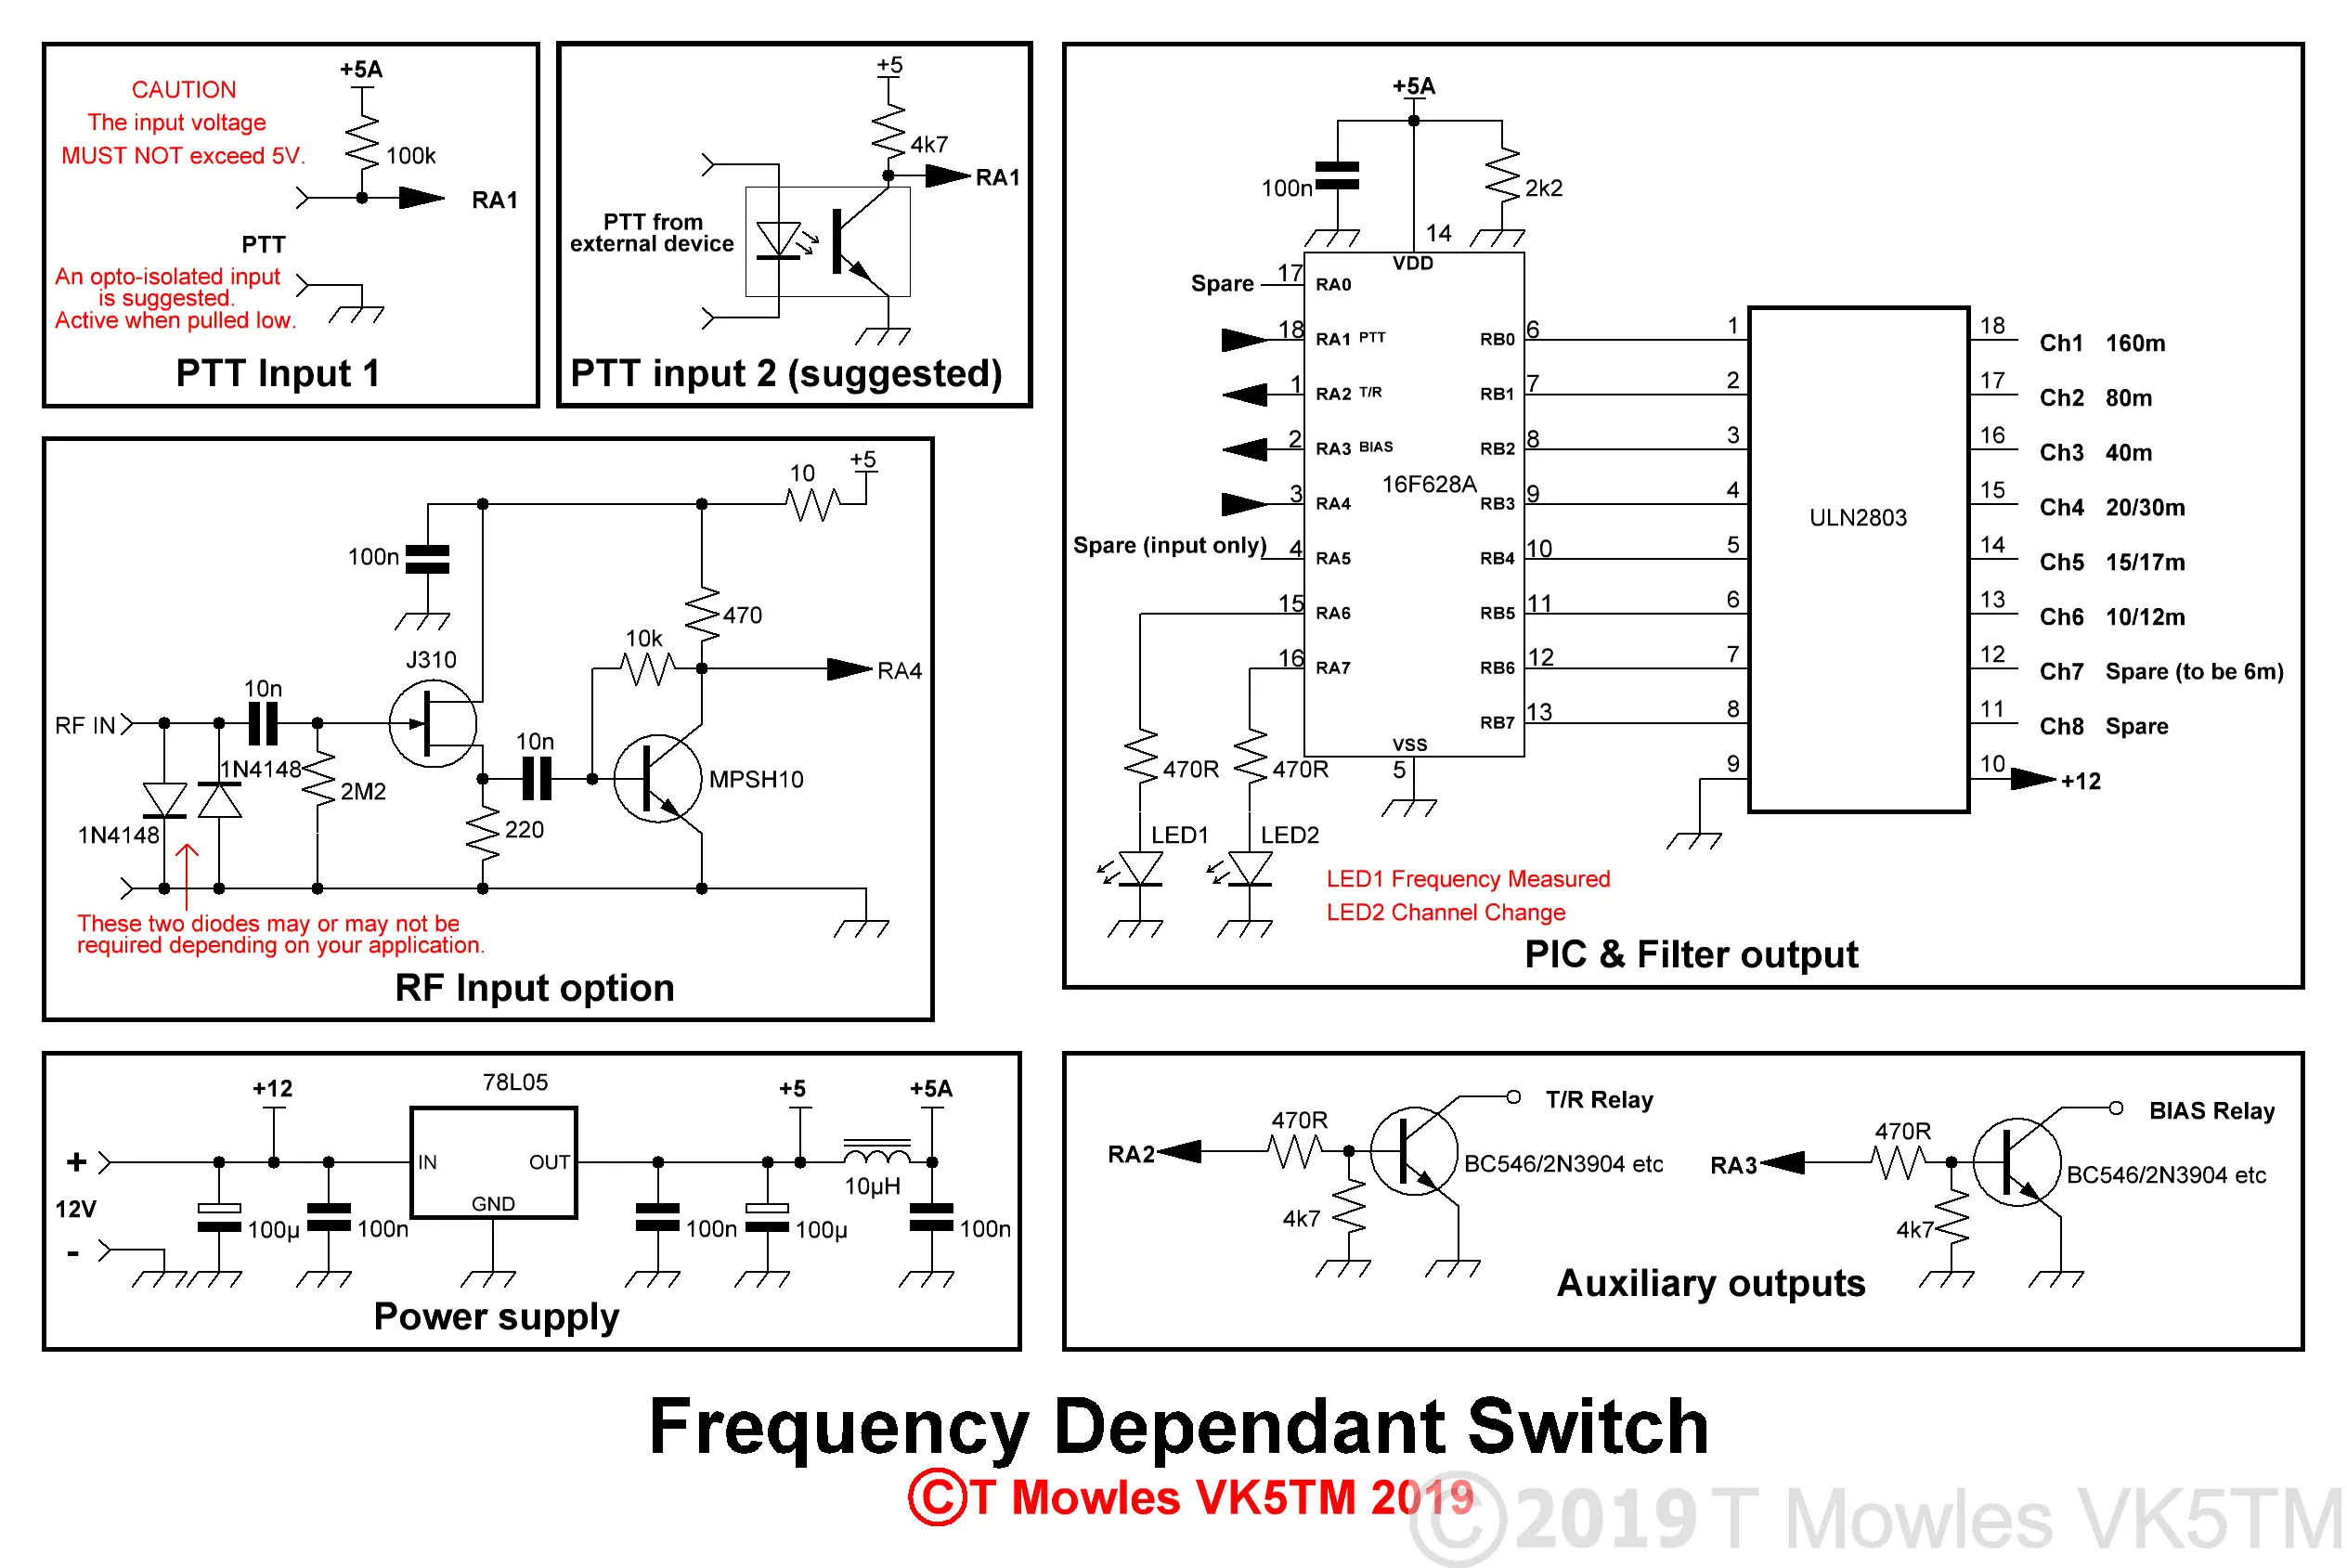 Frequency Dependant Switch schematic